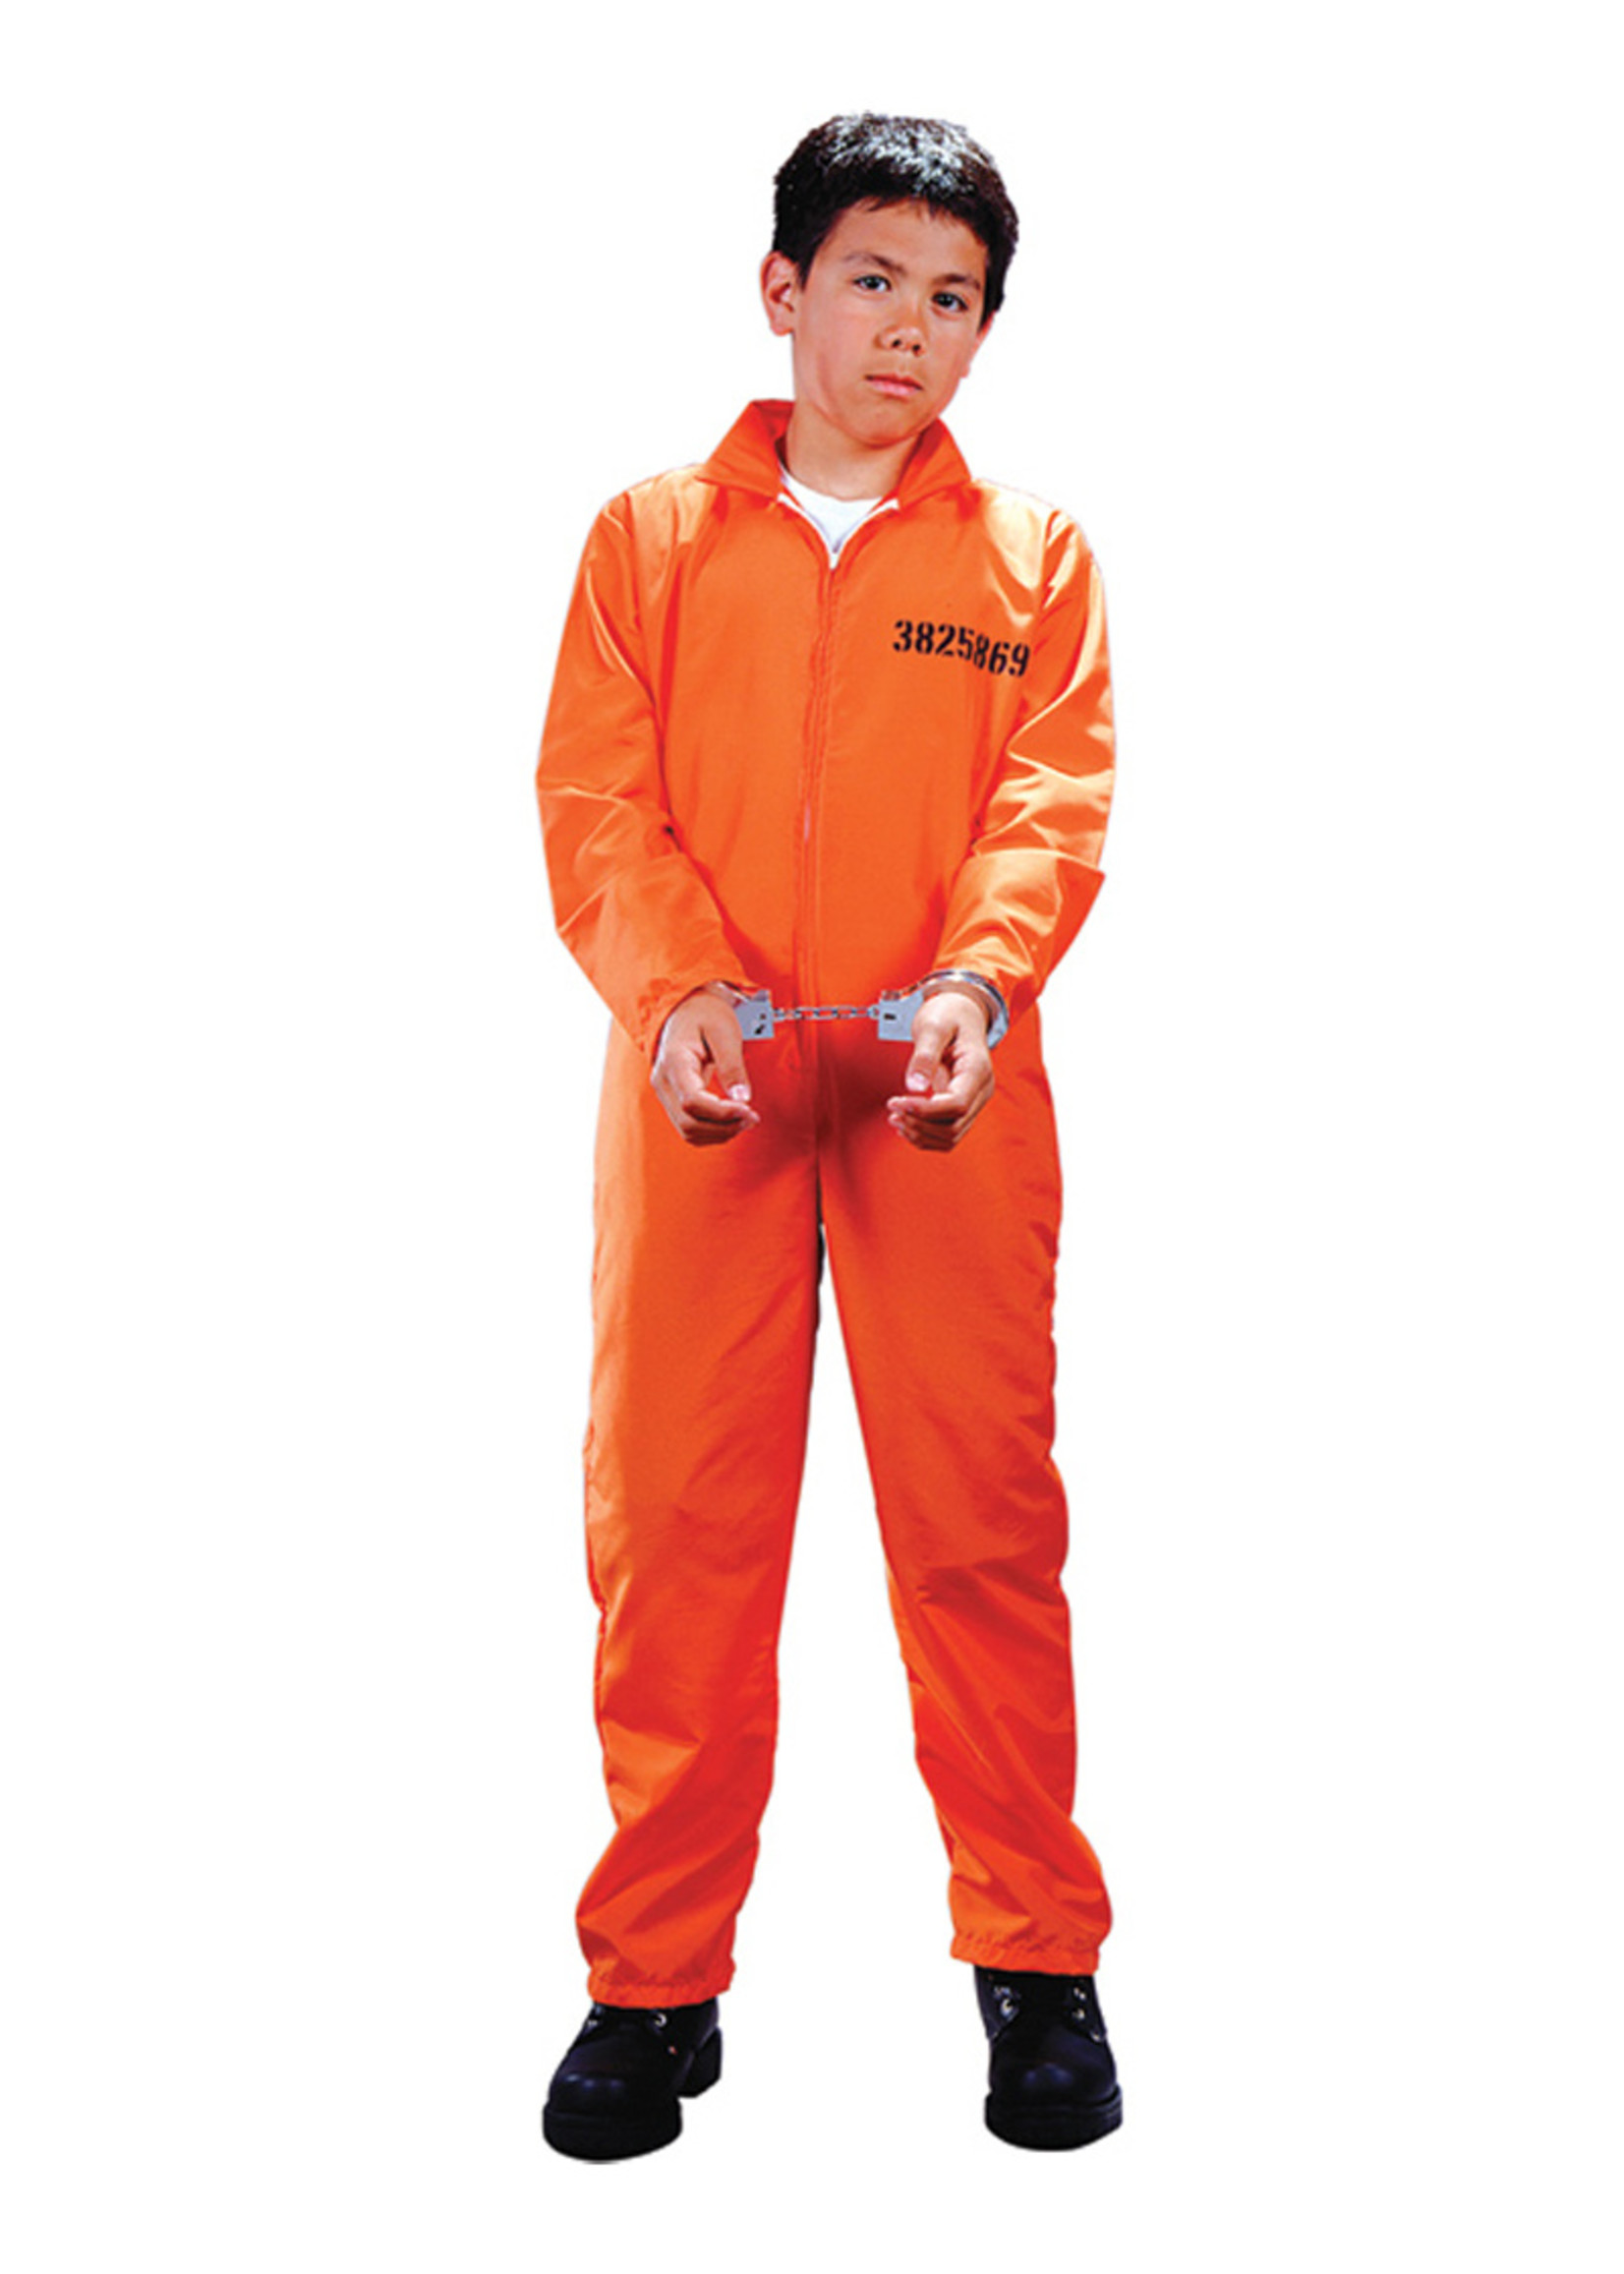 Got Busted Costume - Boys